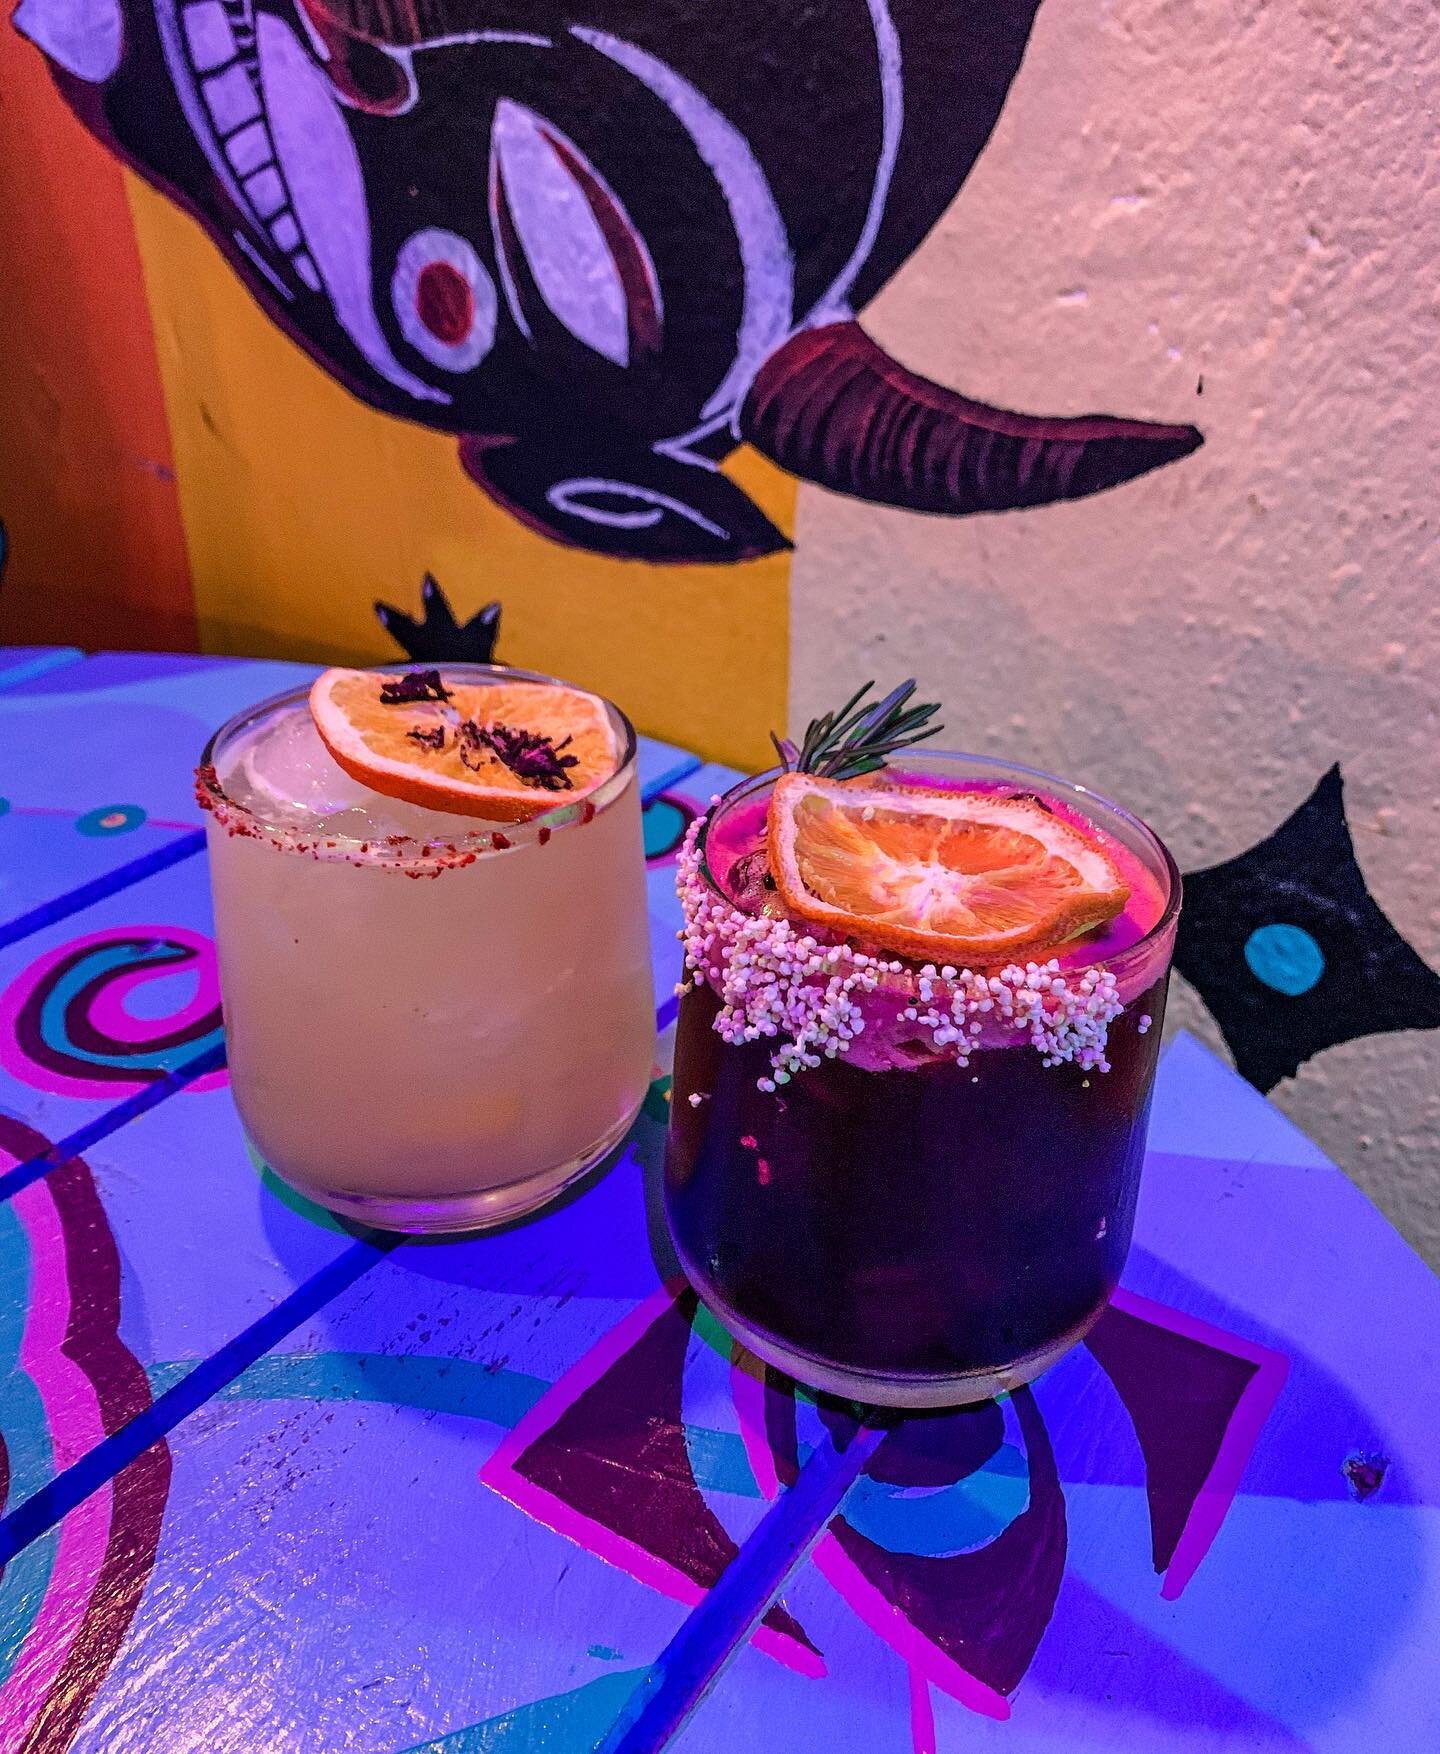 It&rsquo;s Friday night and we&rsquo;re ready for cocktails. Who&rsquo;s joining us? &iexcl;Salud por el fin de semana!

🆆🅷🅰🆃 An eclectic spot, filled with bright colored art and murals, topped off with delicious, creative mezcal-focused cocktail